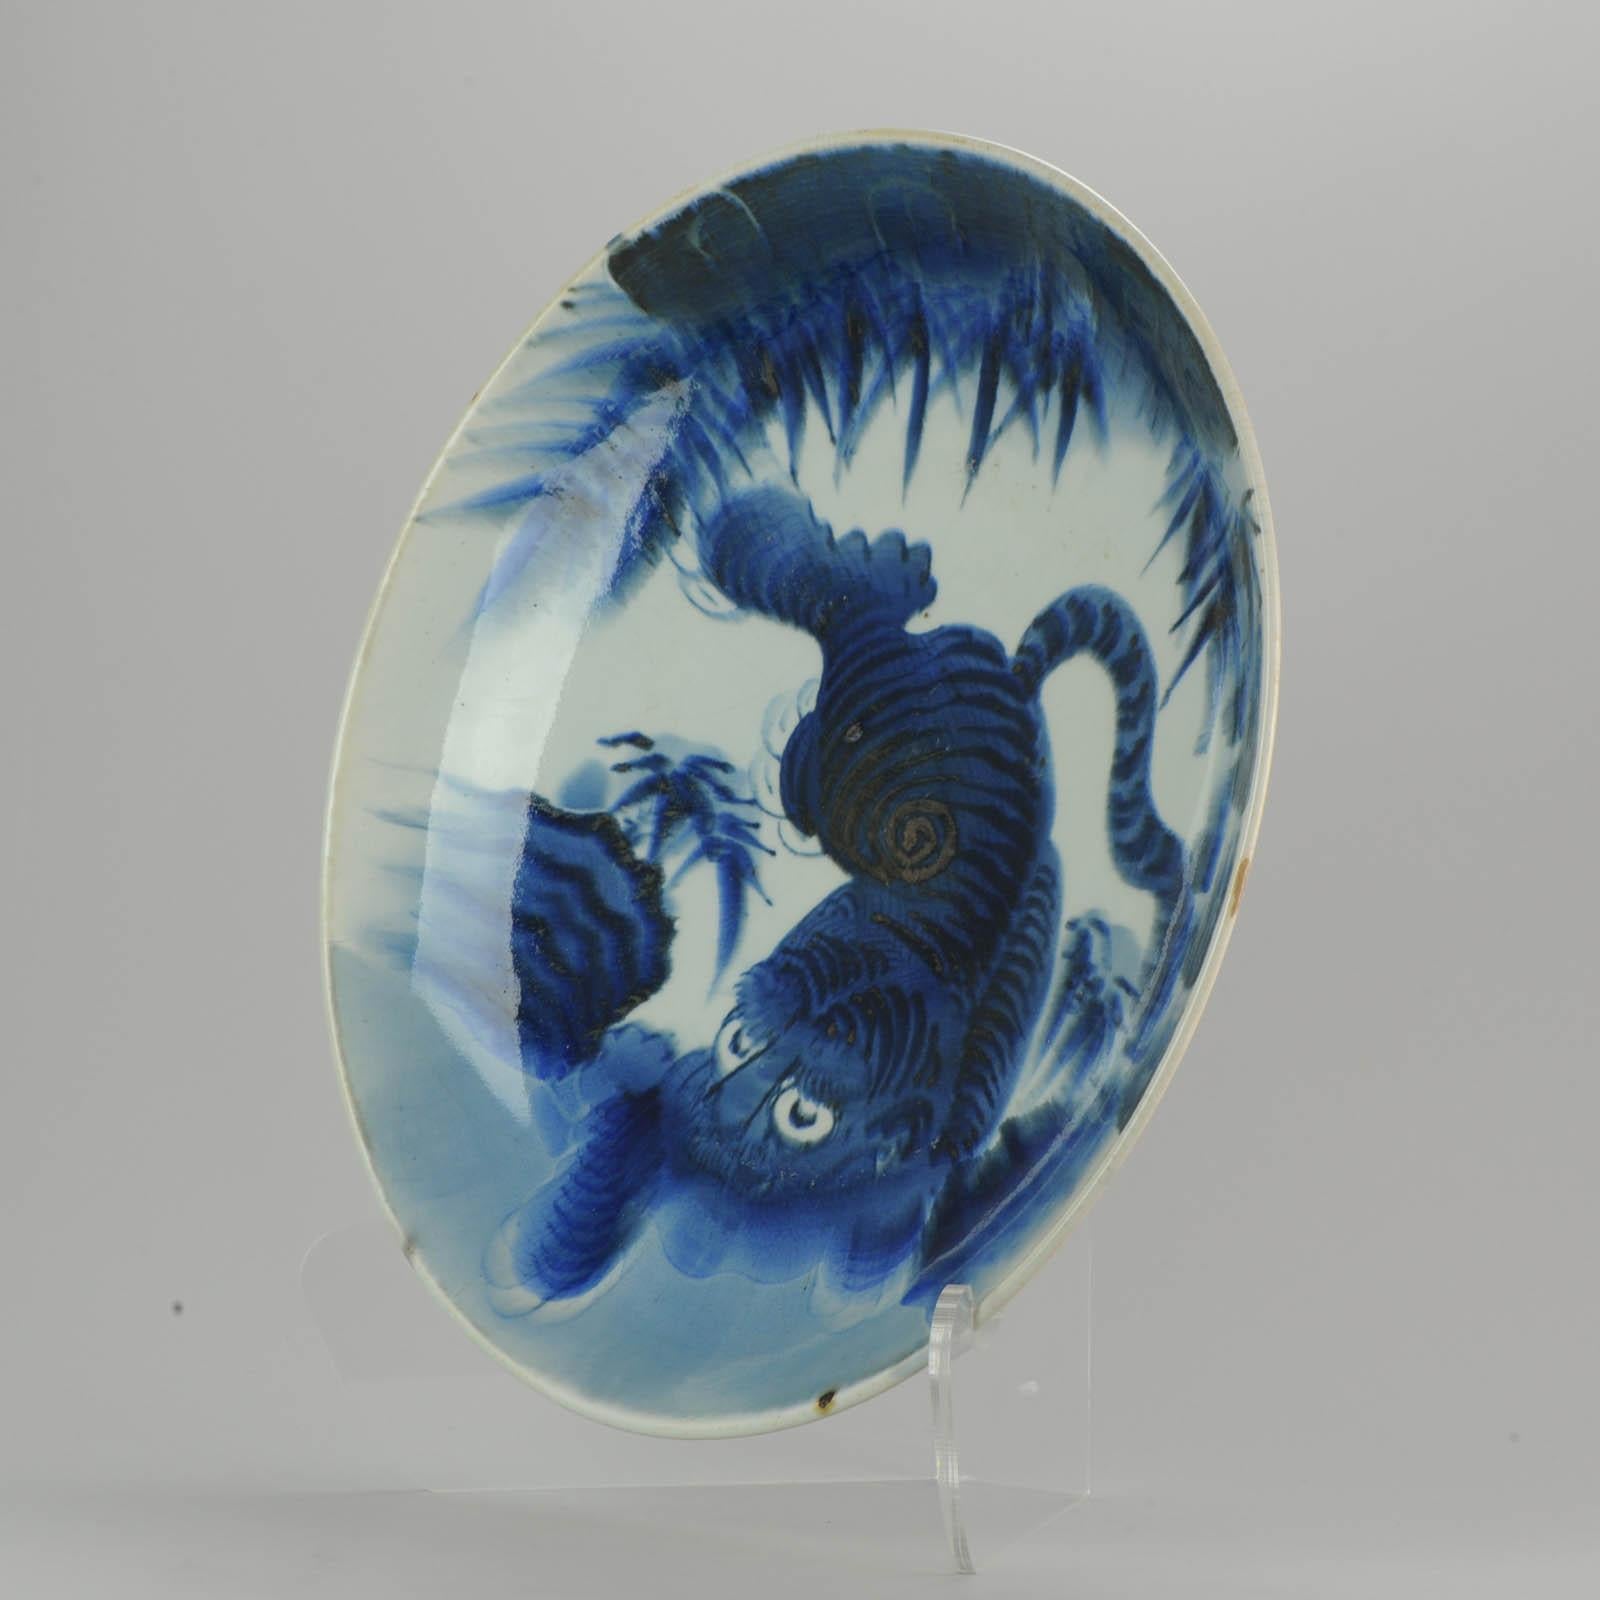 Huge and very nicely painted Japanese charger with blue and white decoration of tiger.
19-8-19-1-2
Condition:
Overall condition: Very good condition, only crackle lines all-over plate. At back only 1 area. Measures: 395 x 64 mm